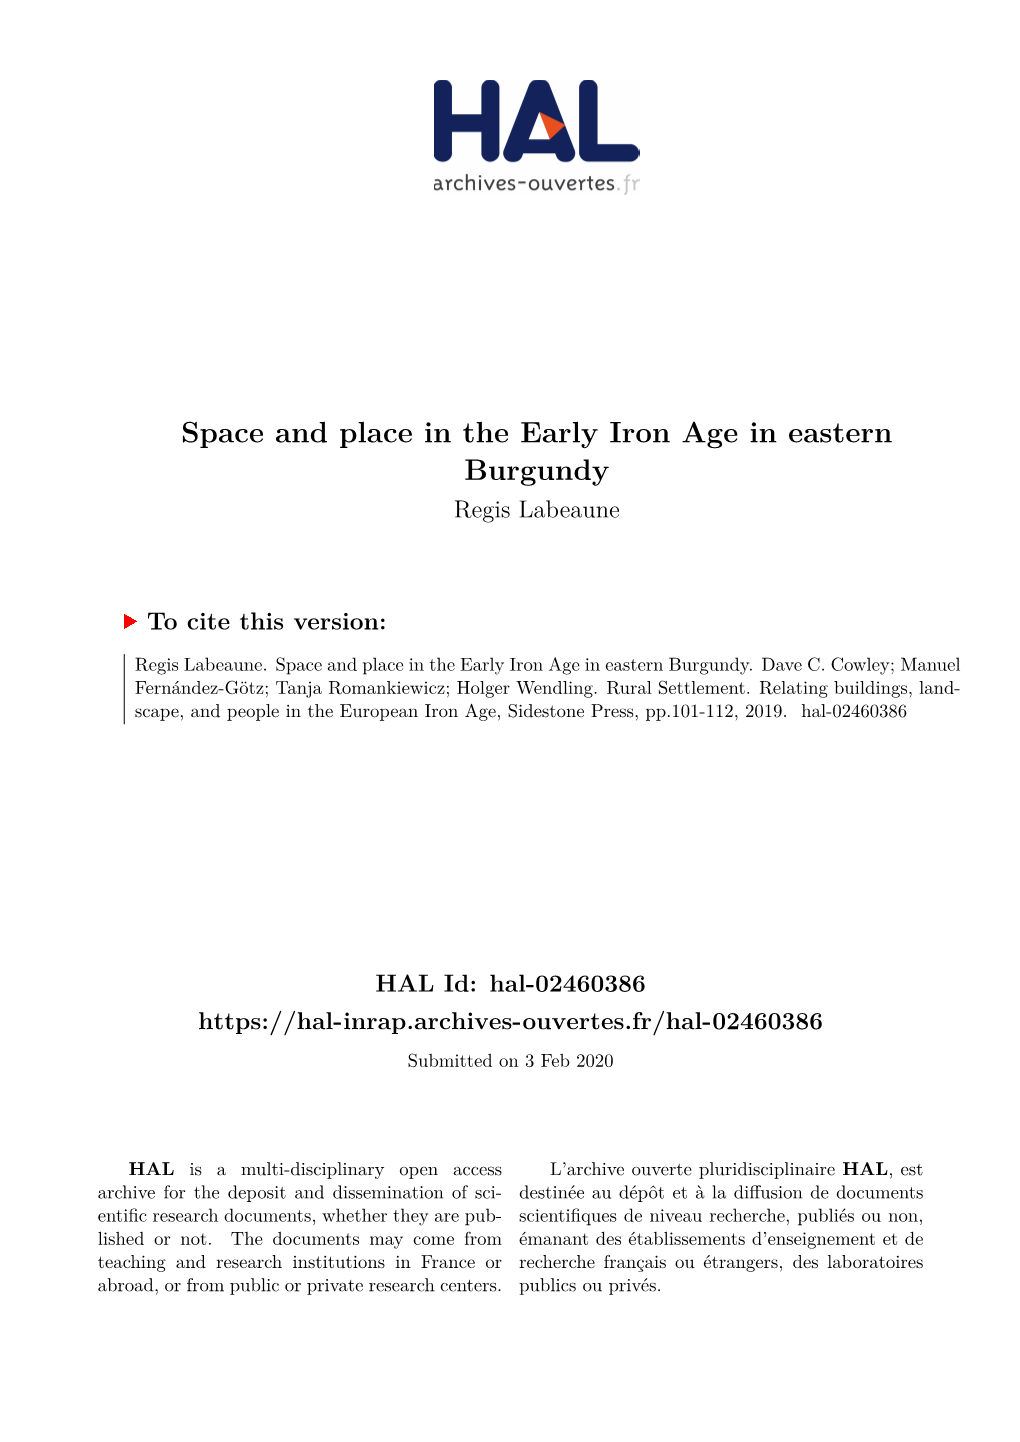 Space and Place in the Early Iron Age in Eastern Burgundy Regis Labeaune